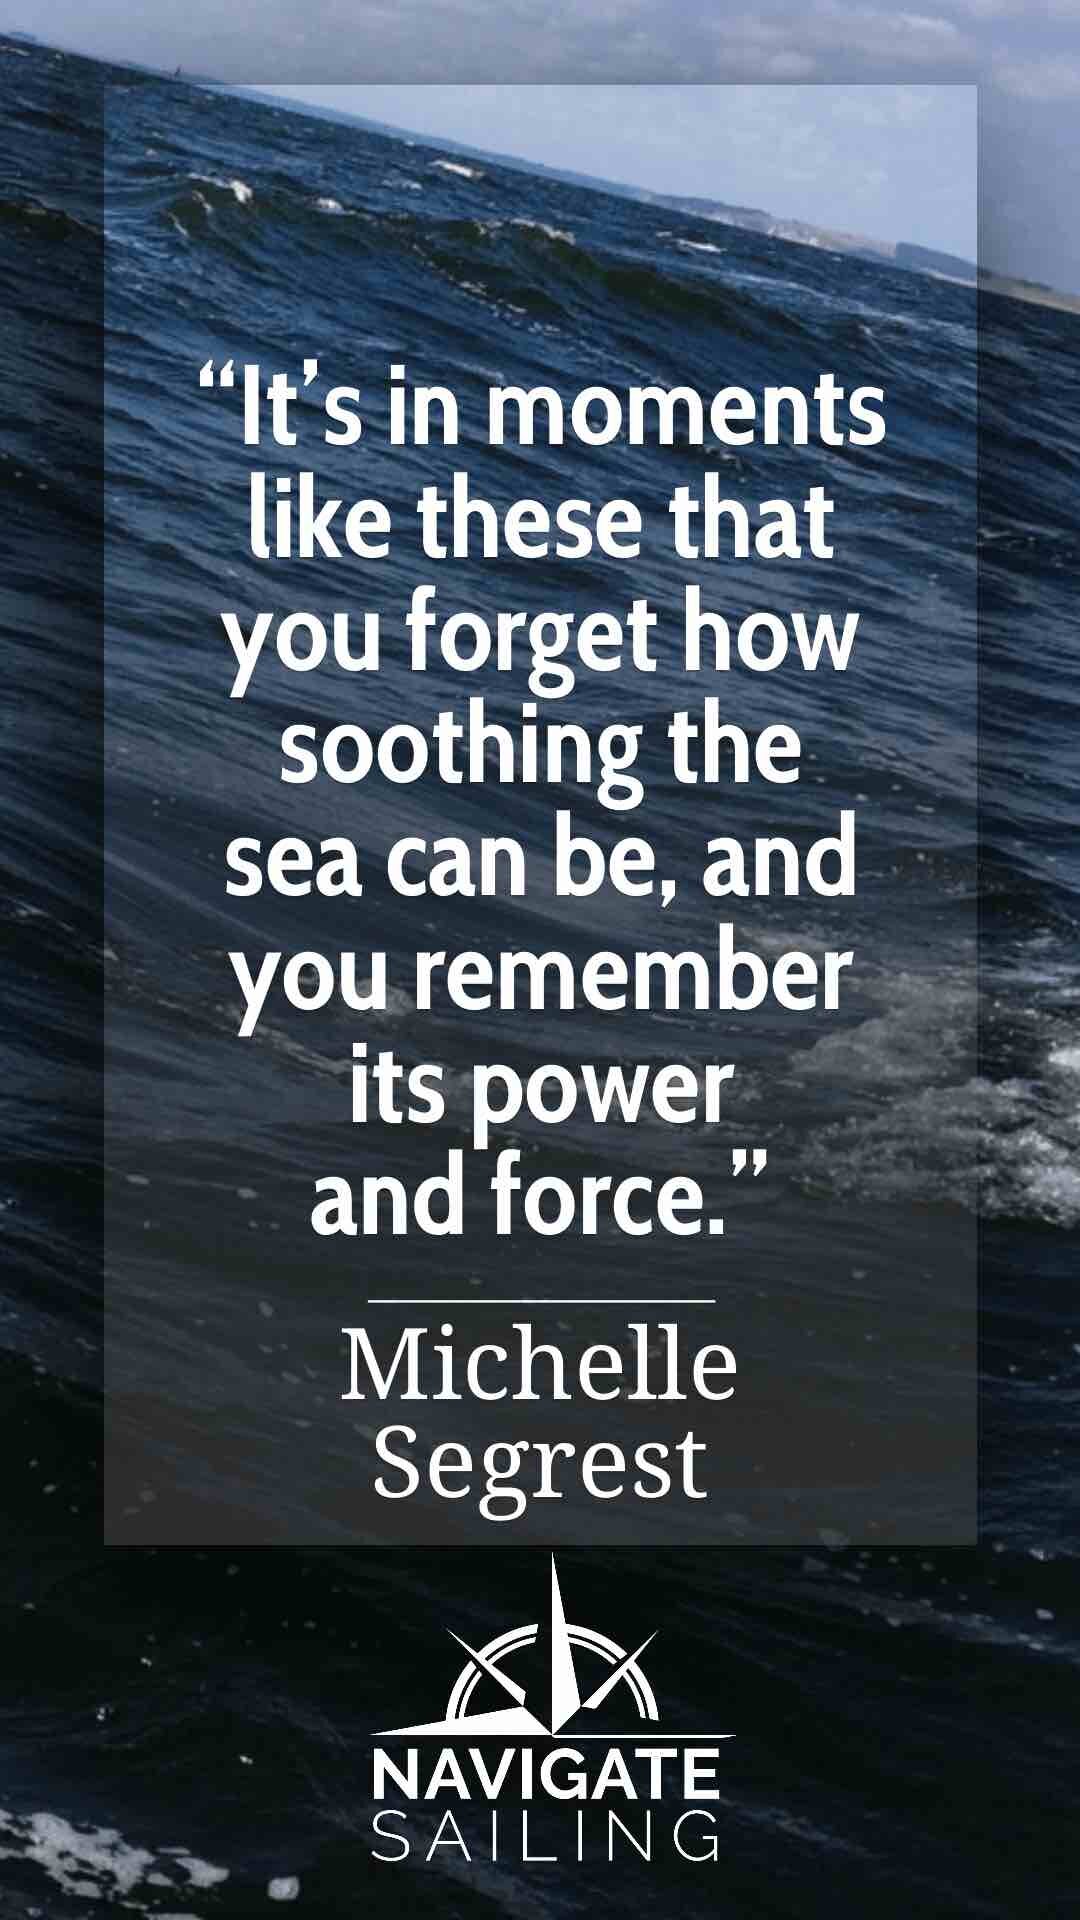 Power of the sea sailing inspirational quote